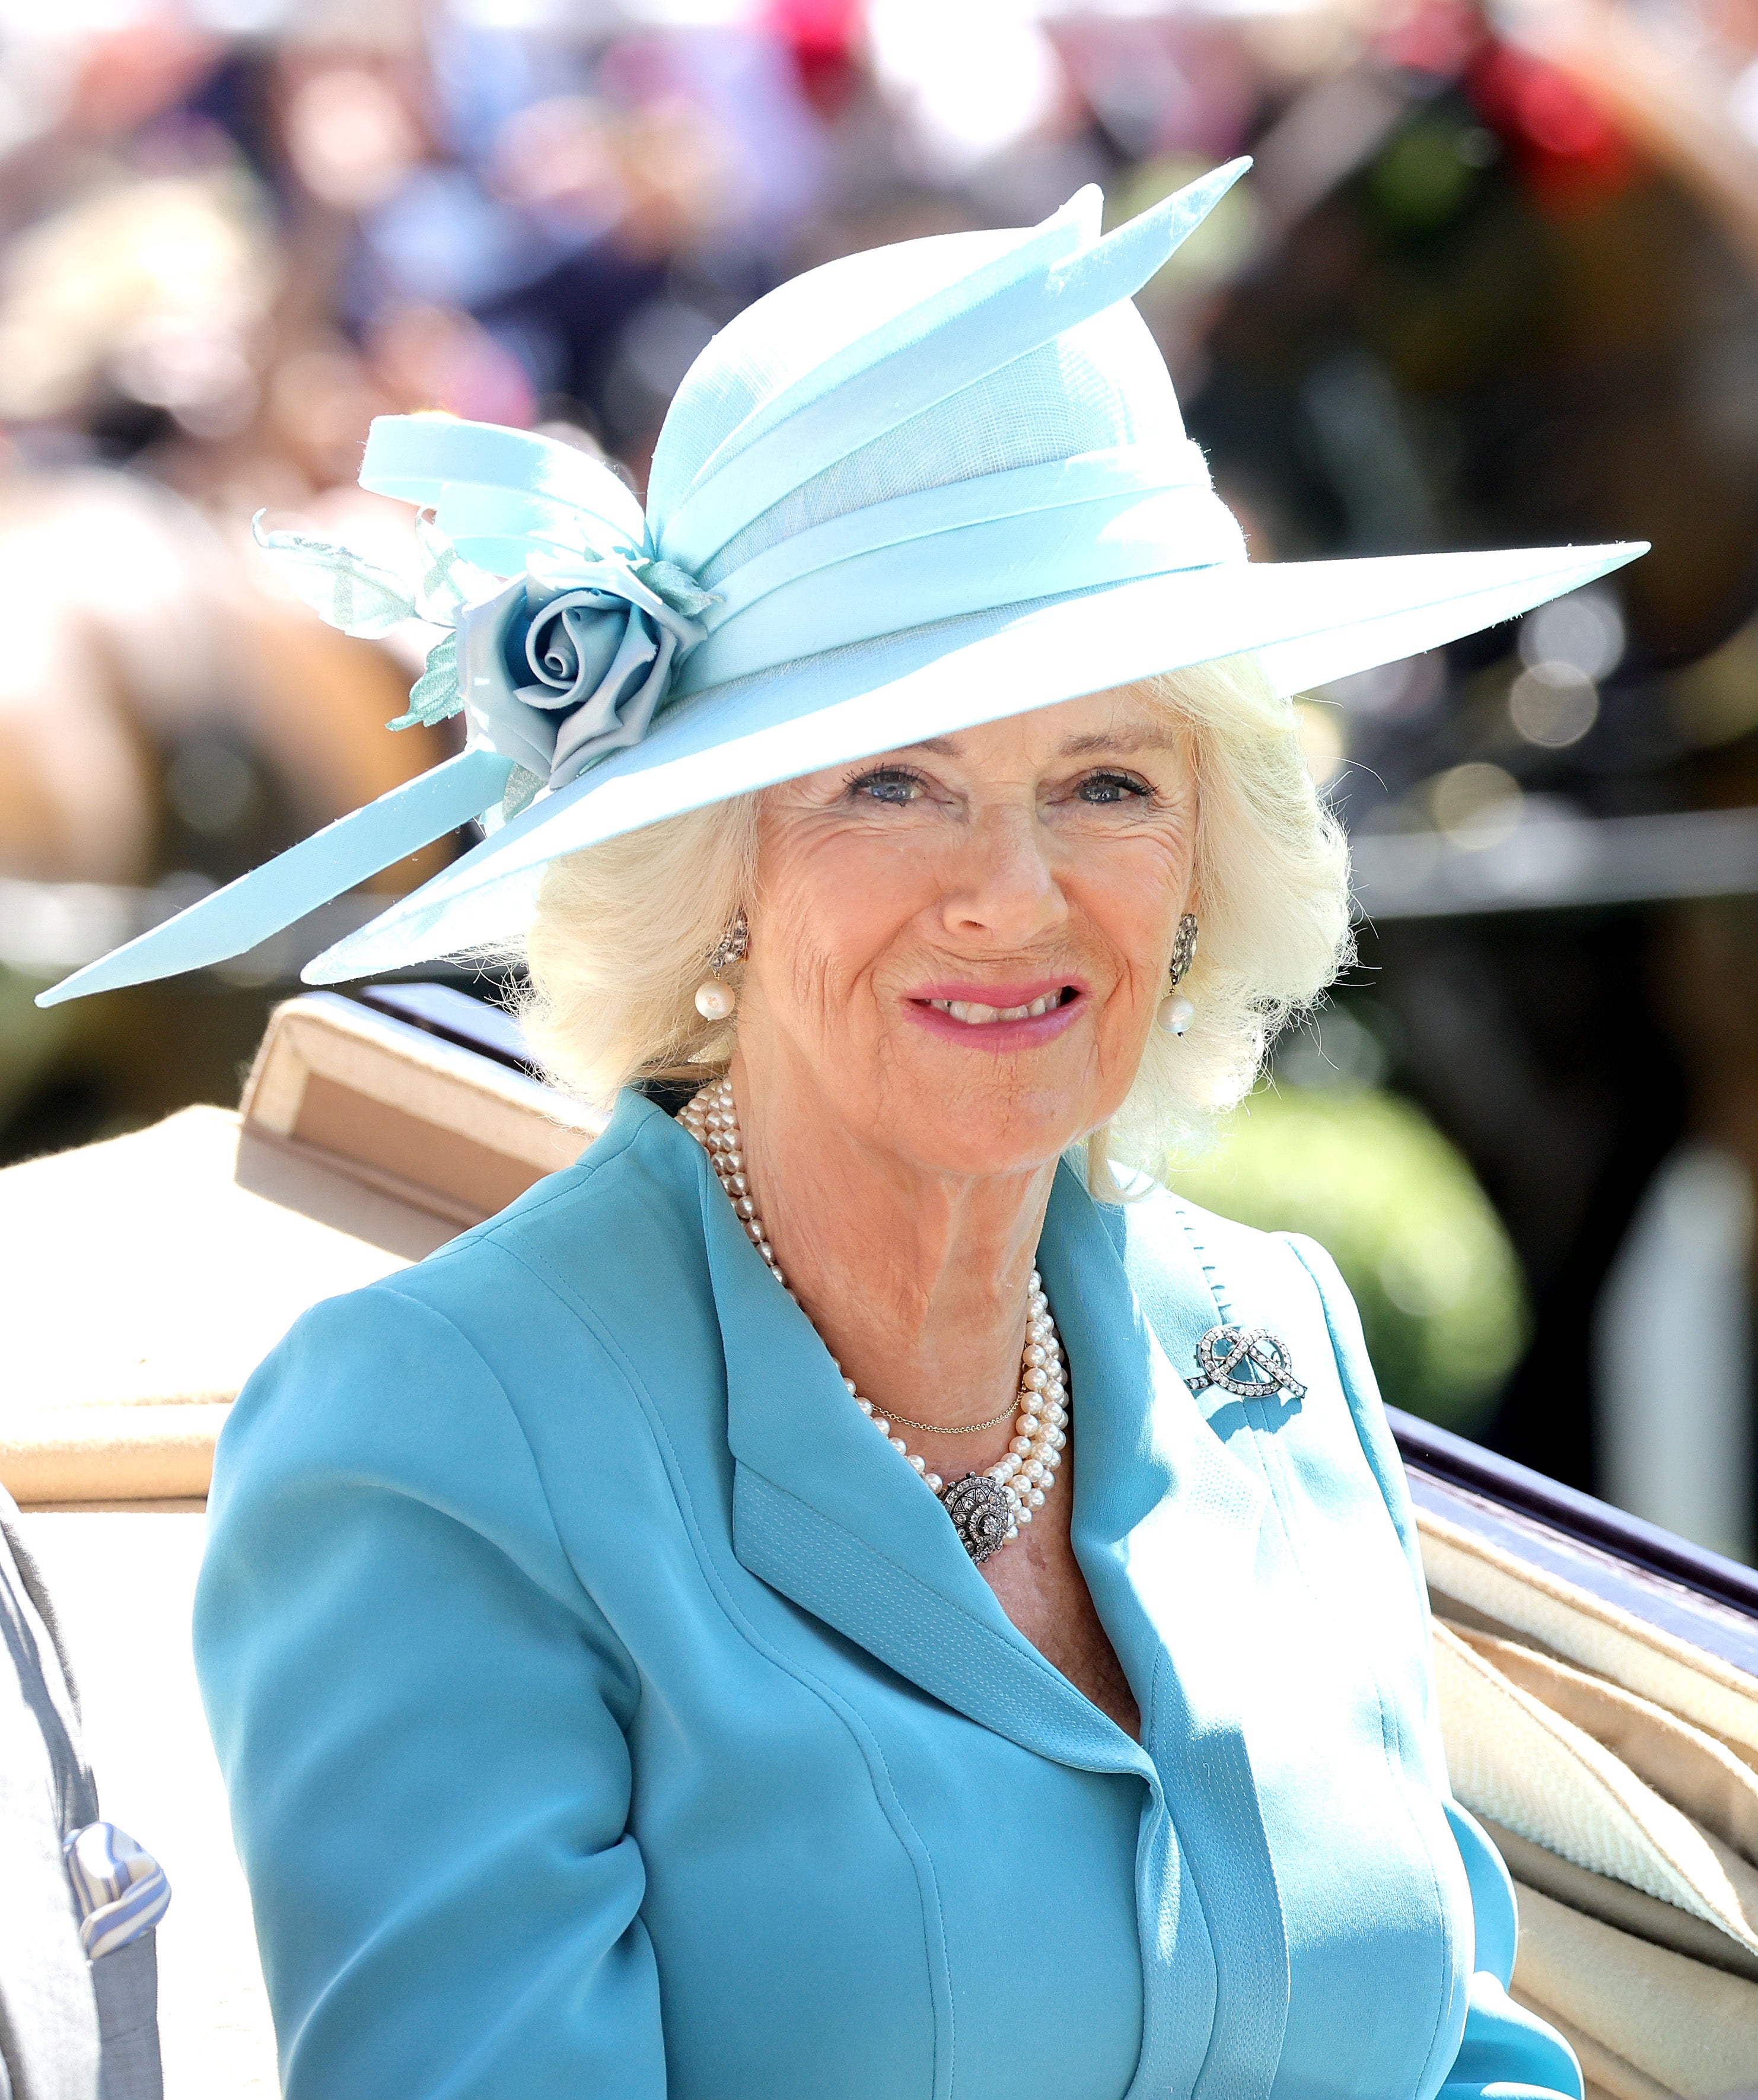 Camilla, Duchess of Cornwall arrives into the parade ring in the royal carriage as she attends Royal Ascot 2022